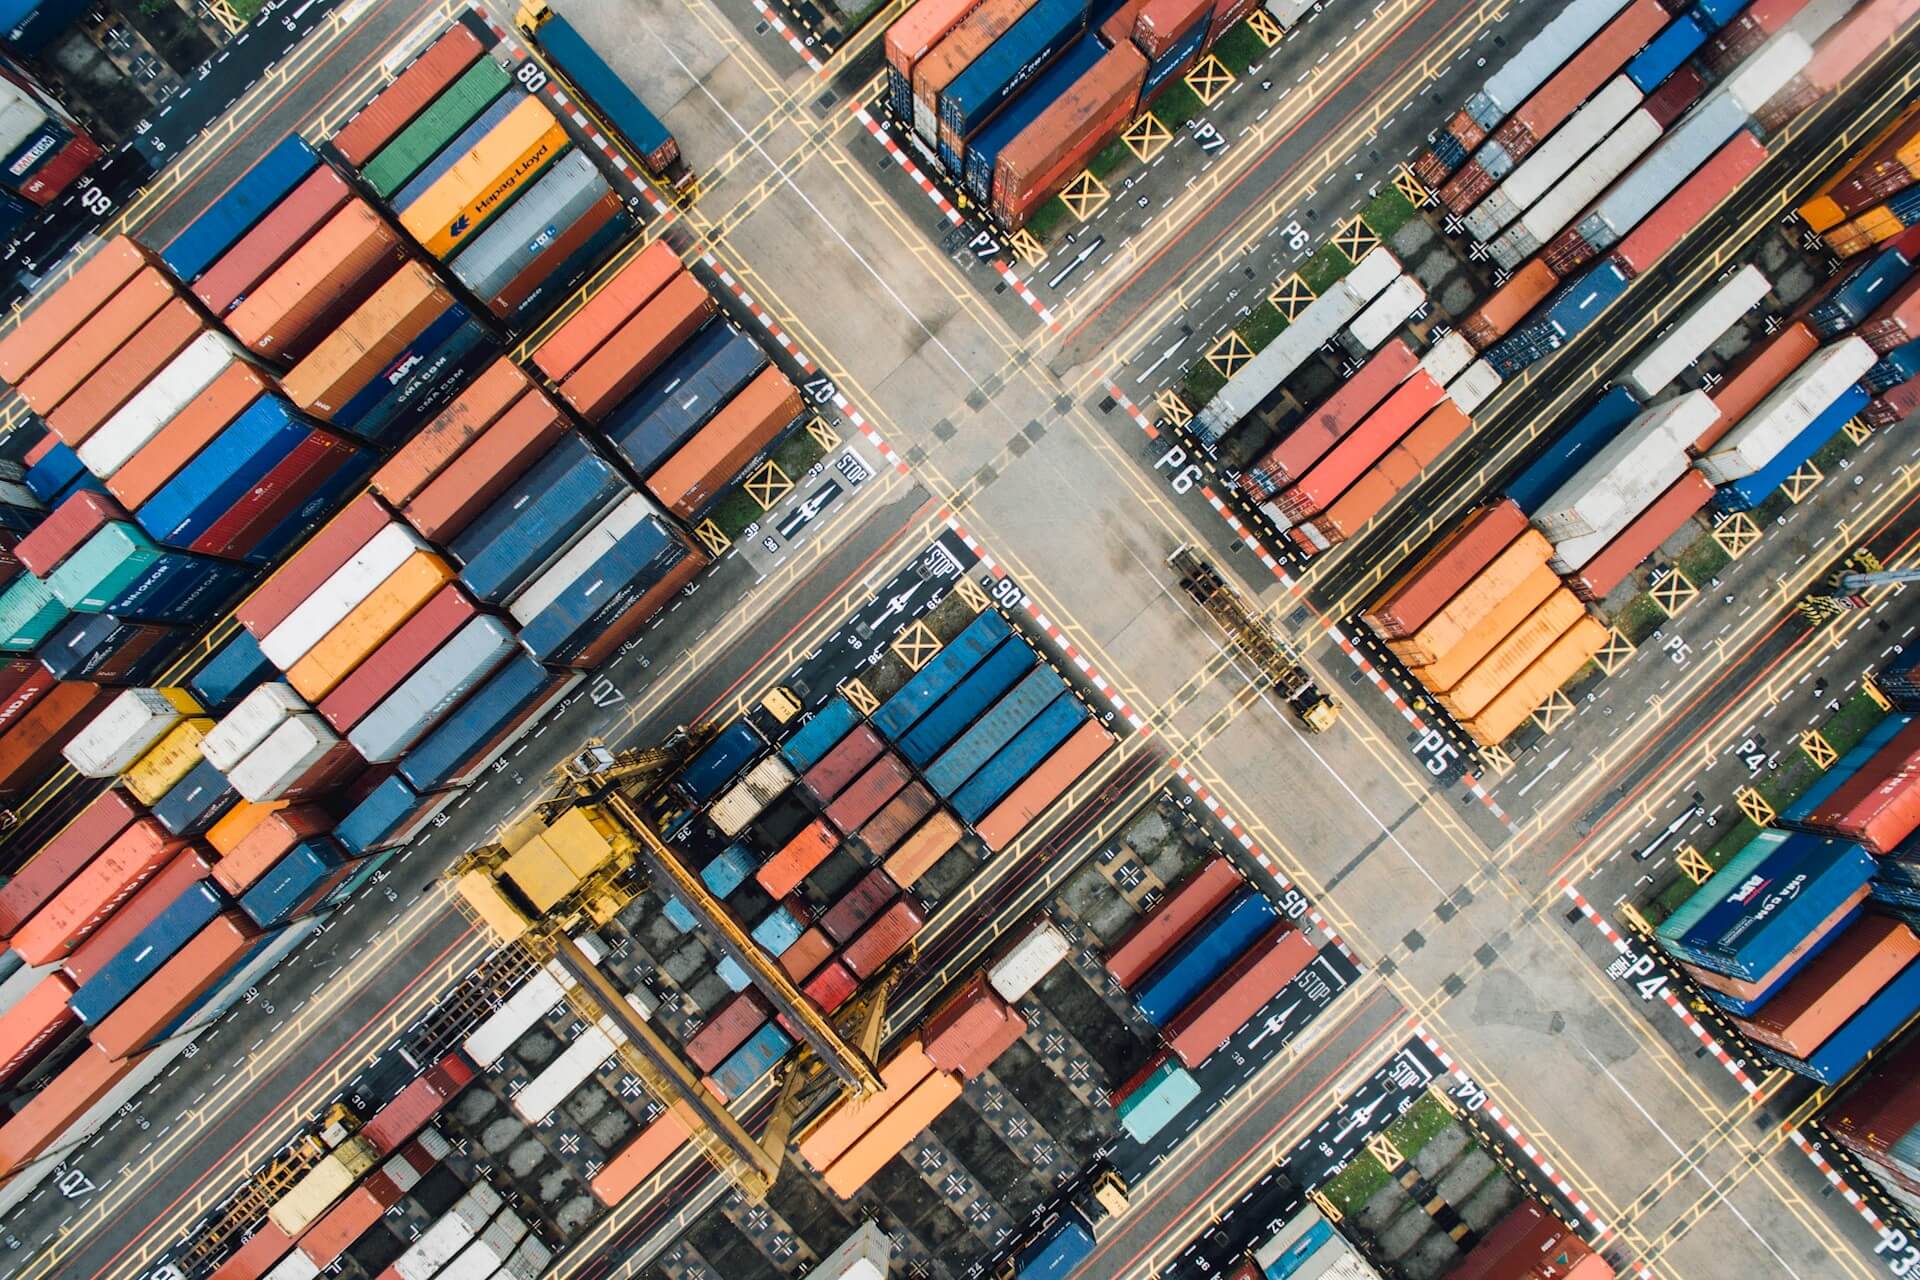 Aerial shot of shipping containers in port